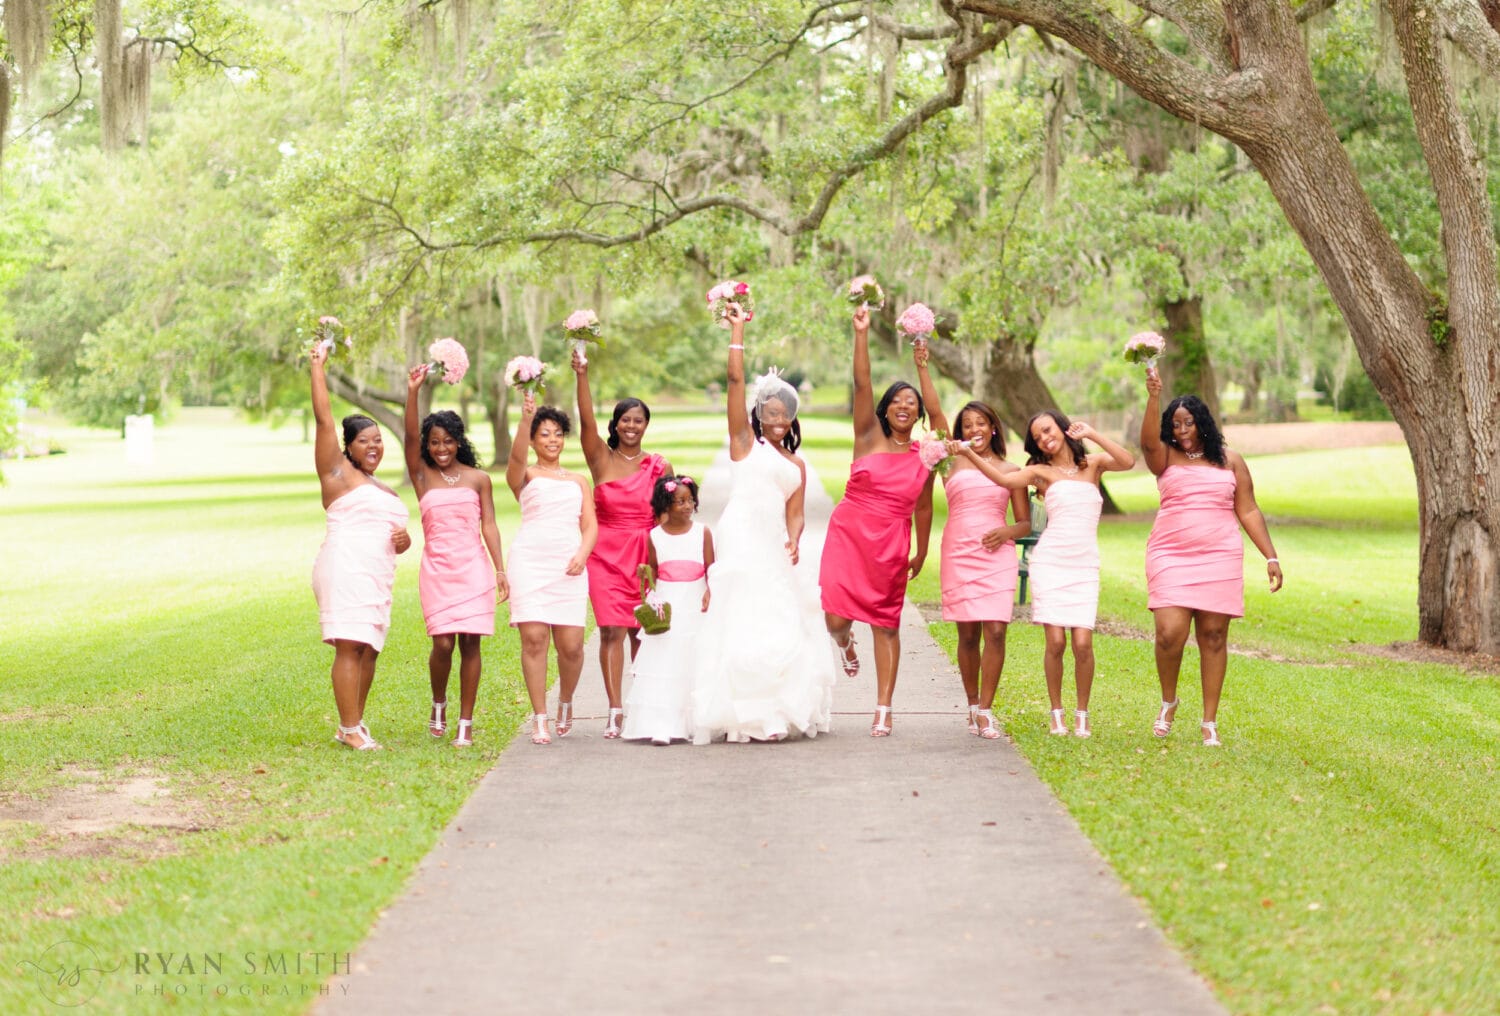 Wedding party pictures after the ceremony - Brookgreen Gardens, Murrells Inlet, SC